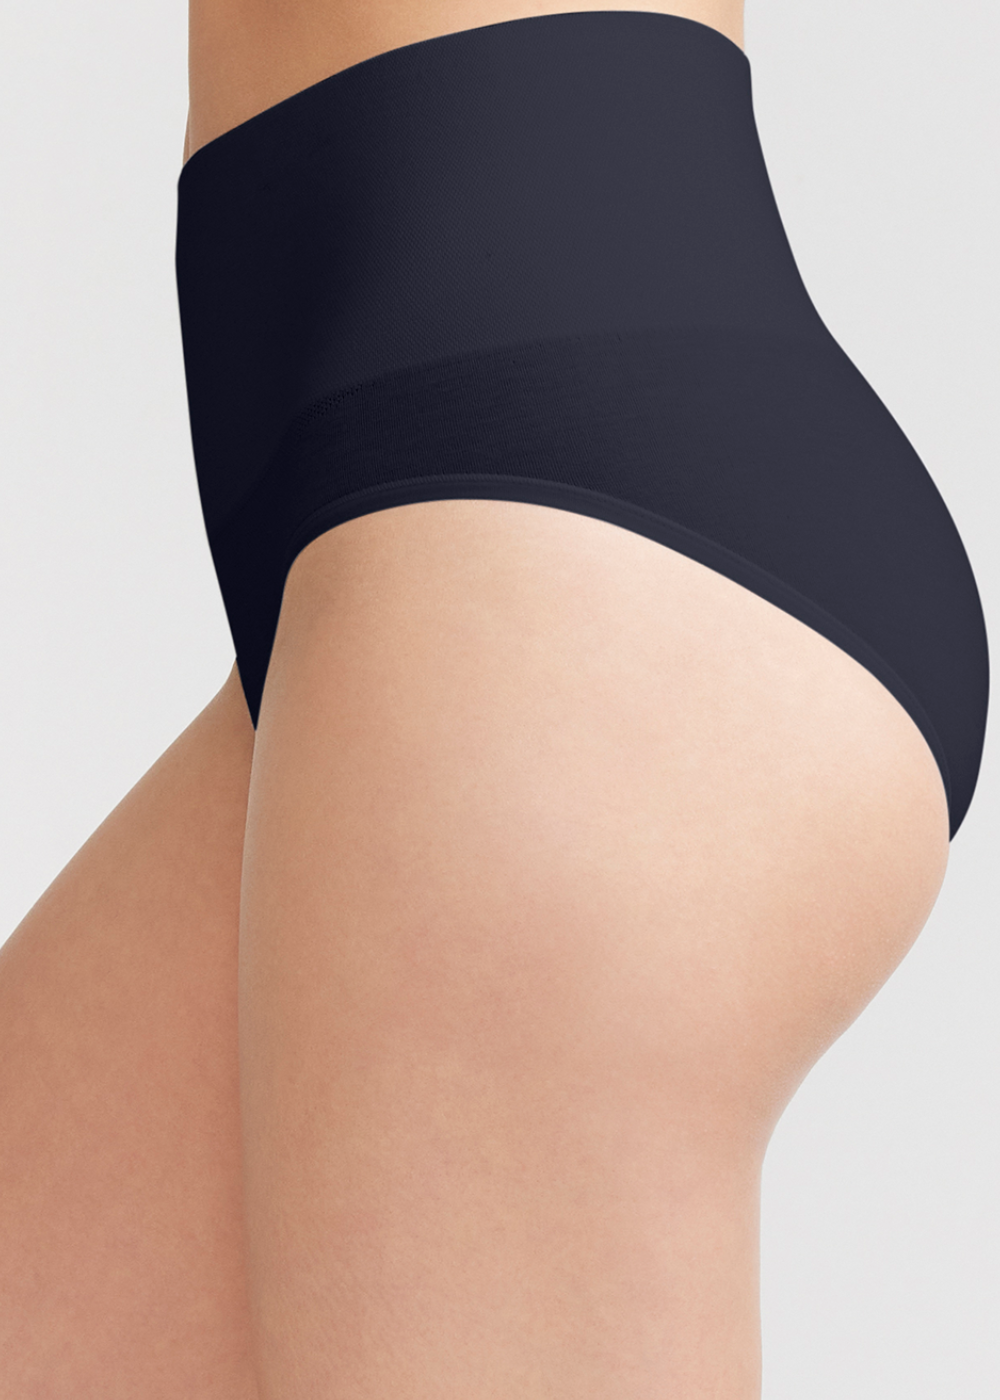 Joy Cotton Shaping Brief - Seamless from Yummie in Black  - 1